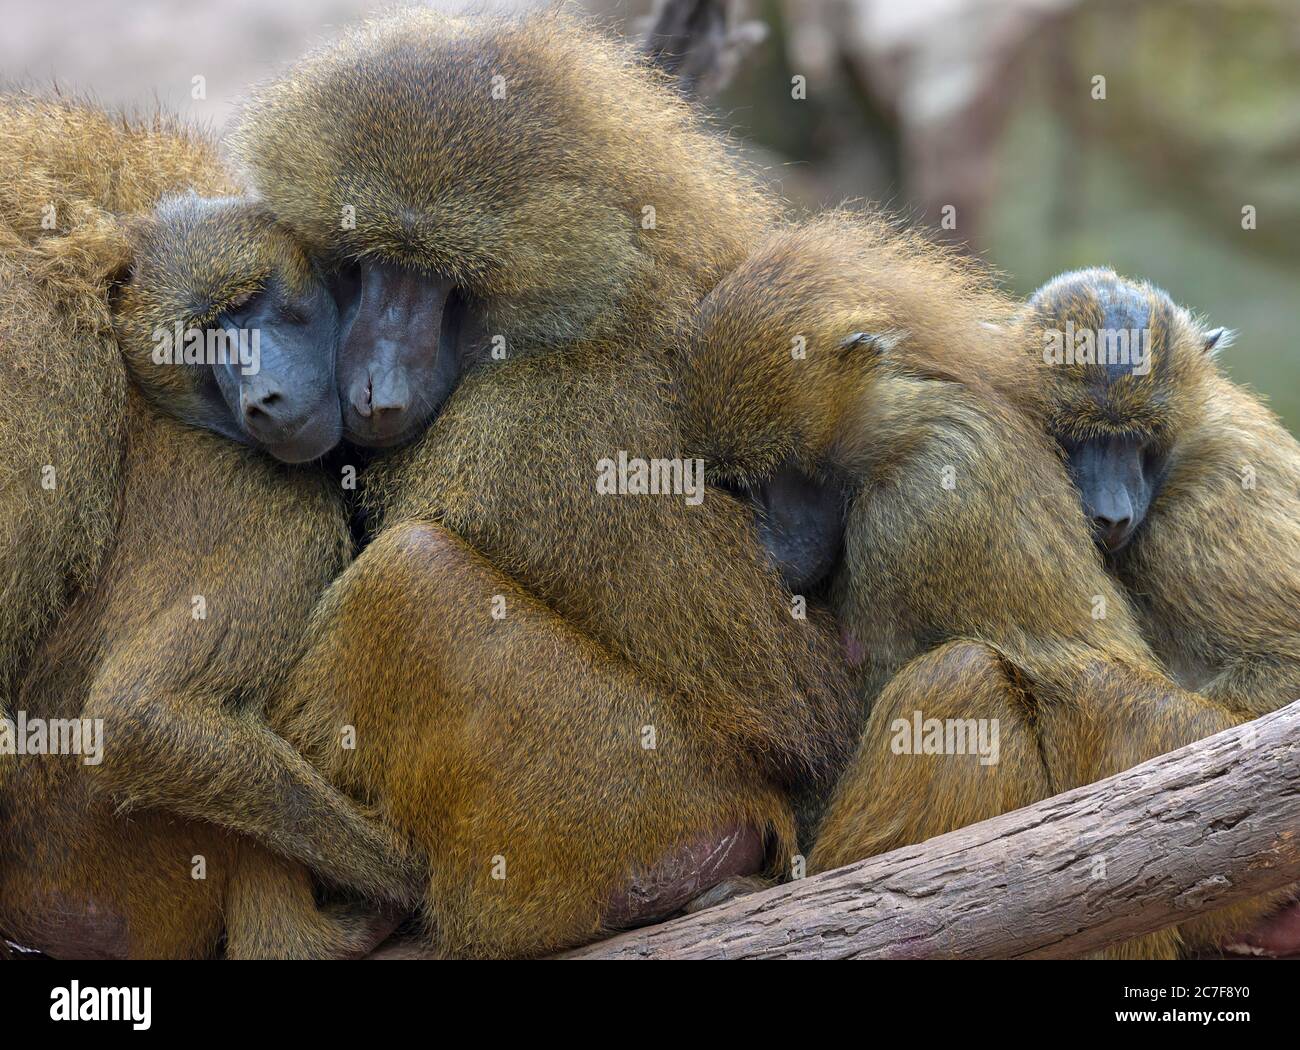 Several Guinea baboon also or (Papio papio), sleeping close together, Nuremberg Zoo, Middle Franconia, Bavaria, Germany Stock Photo